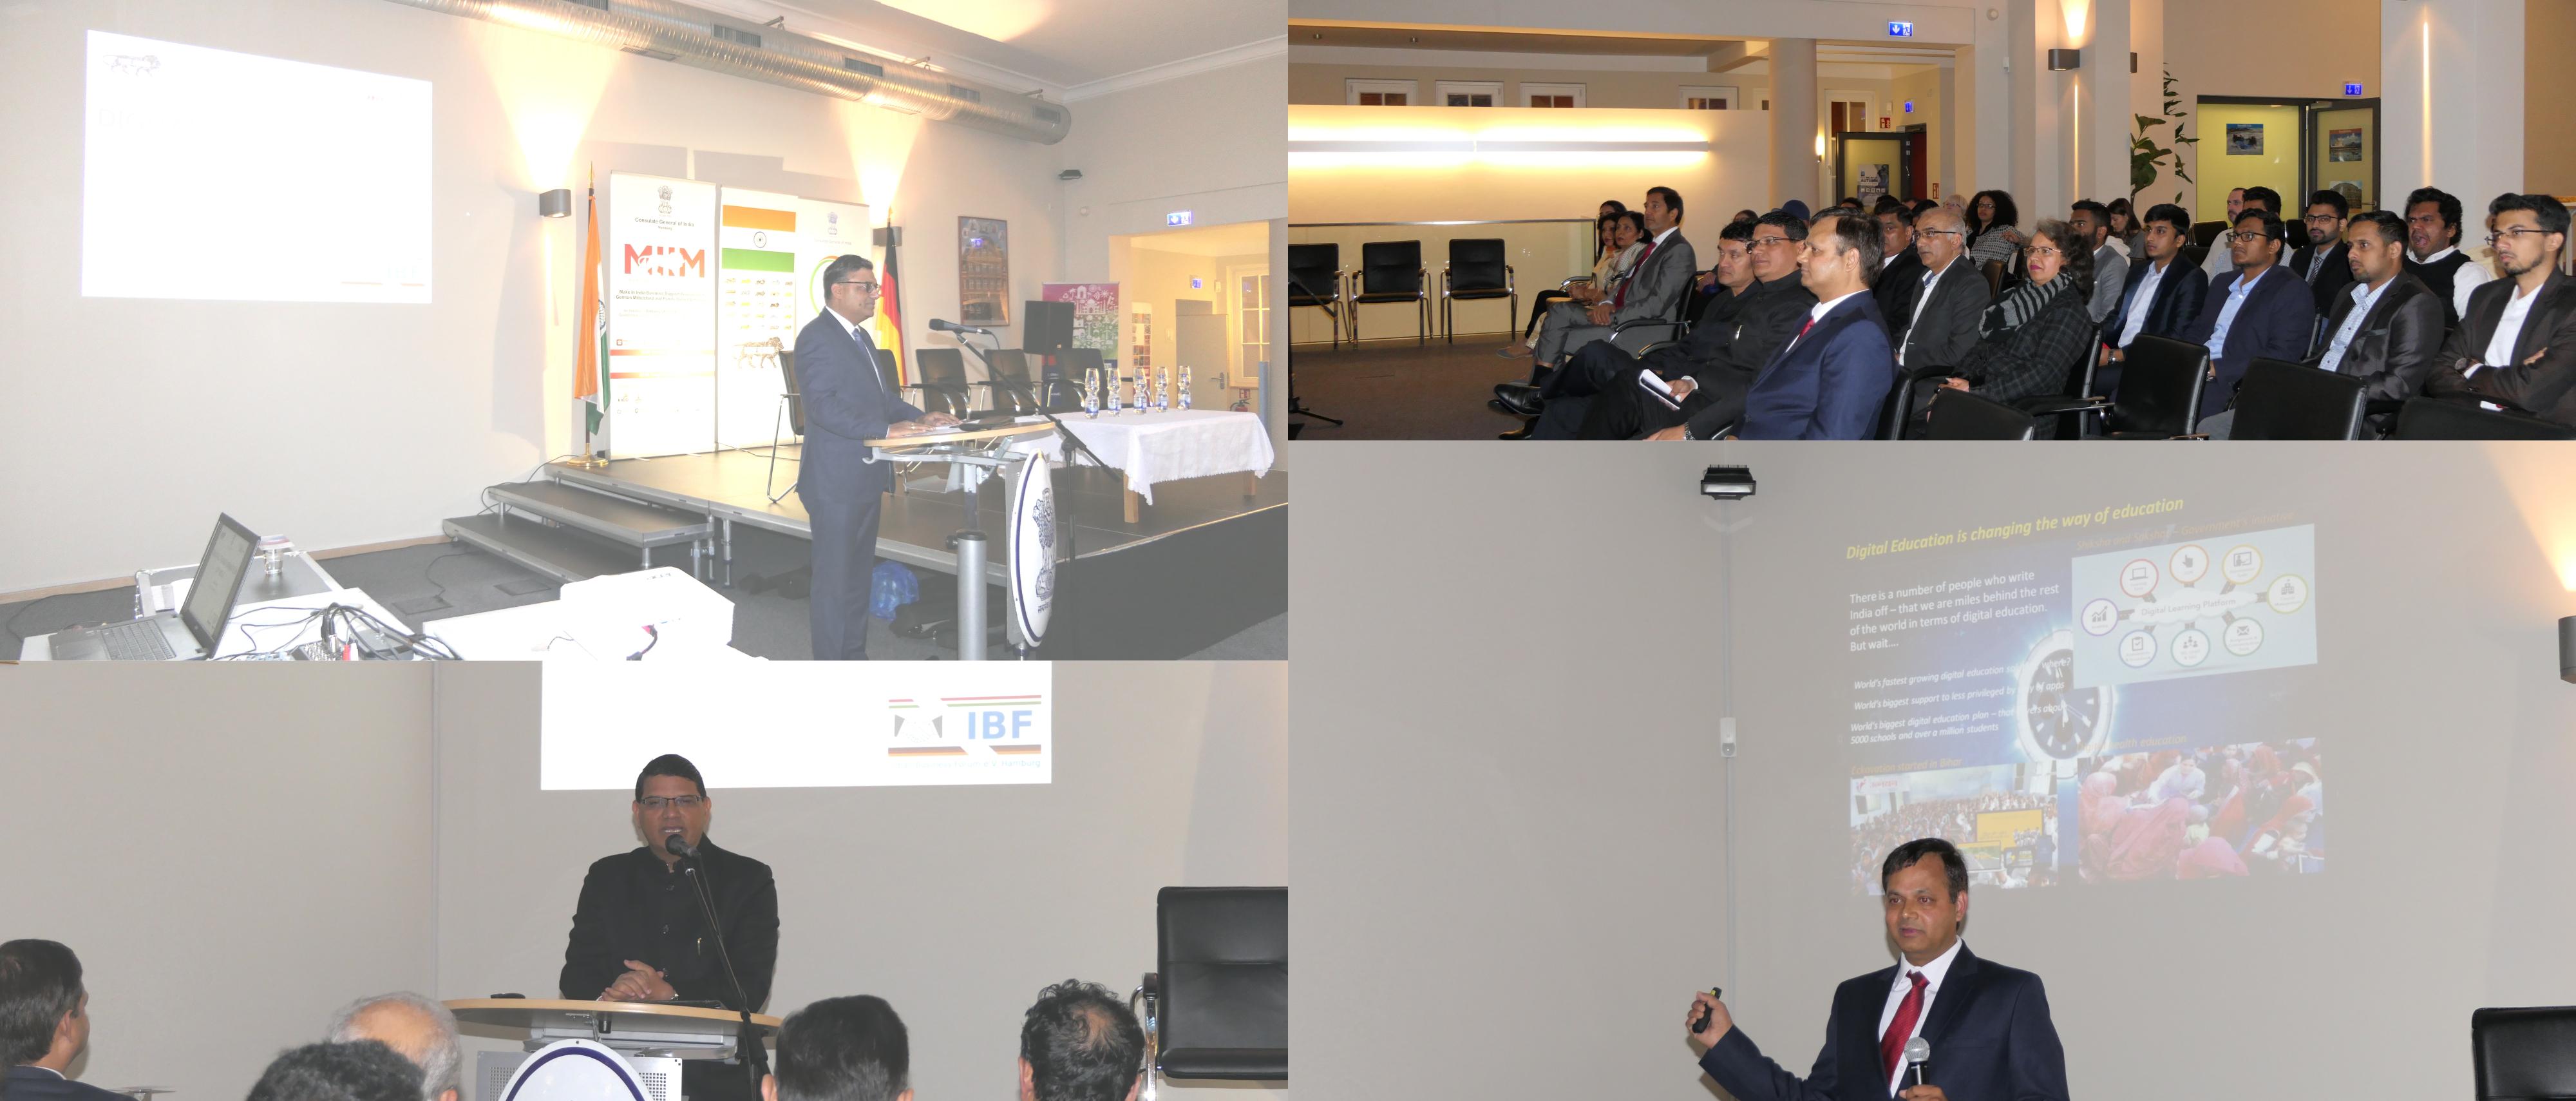  Event “Digital Transformation of India” at the Consulate (October 29, 2019)